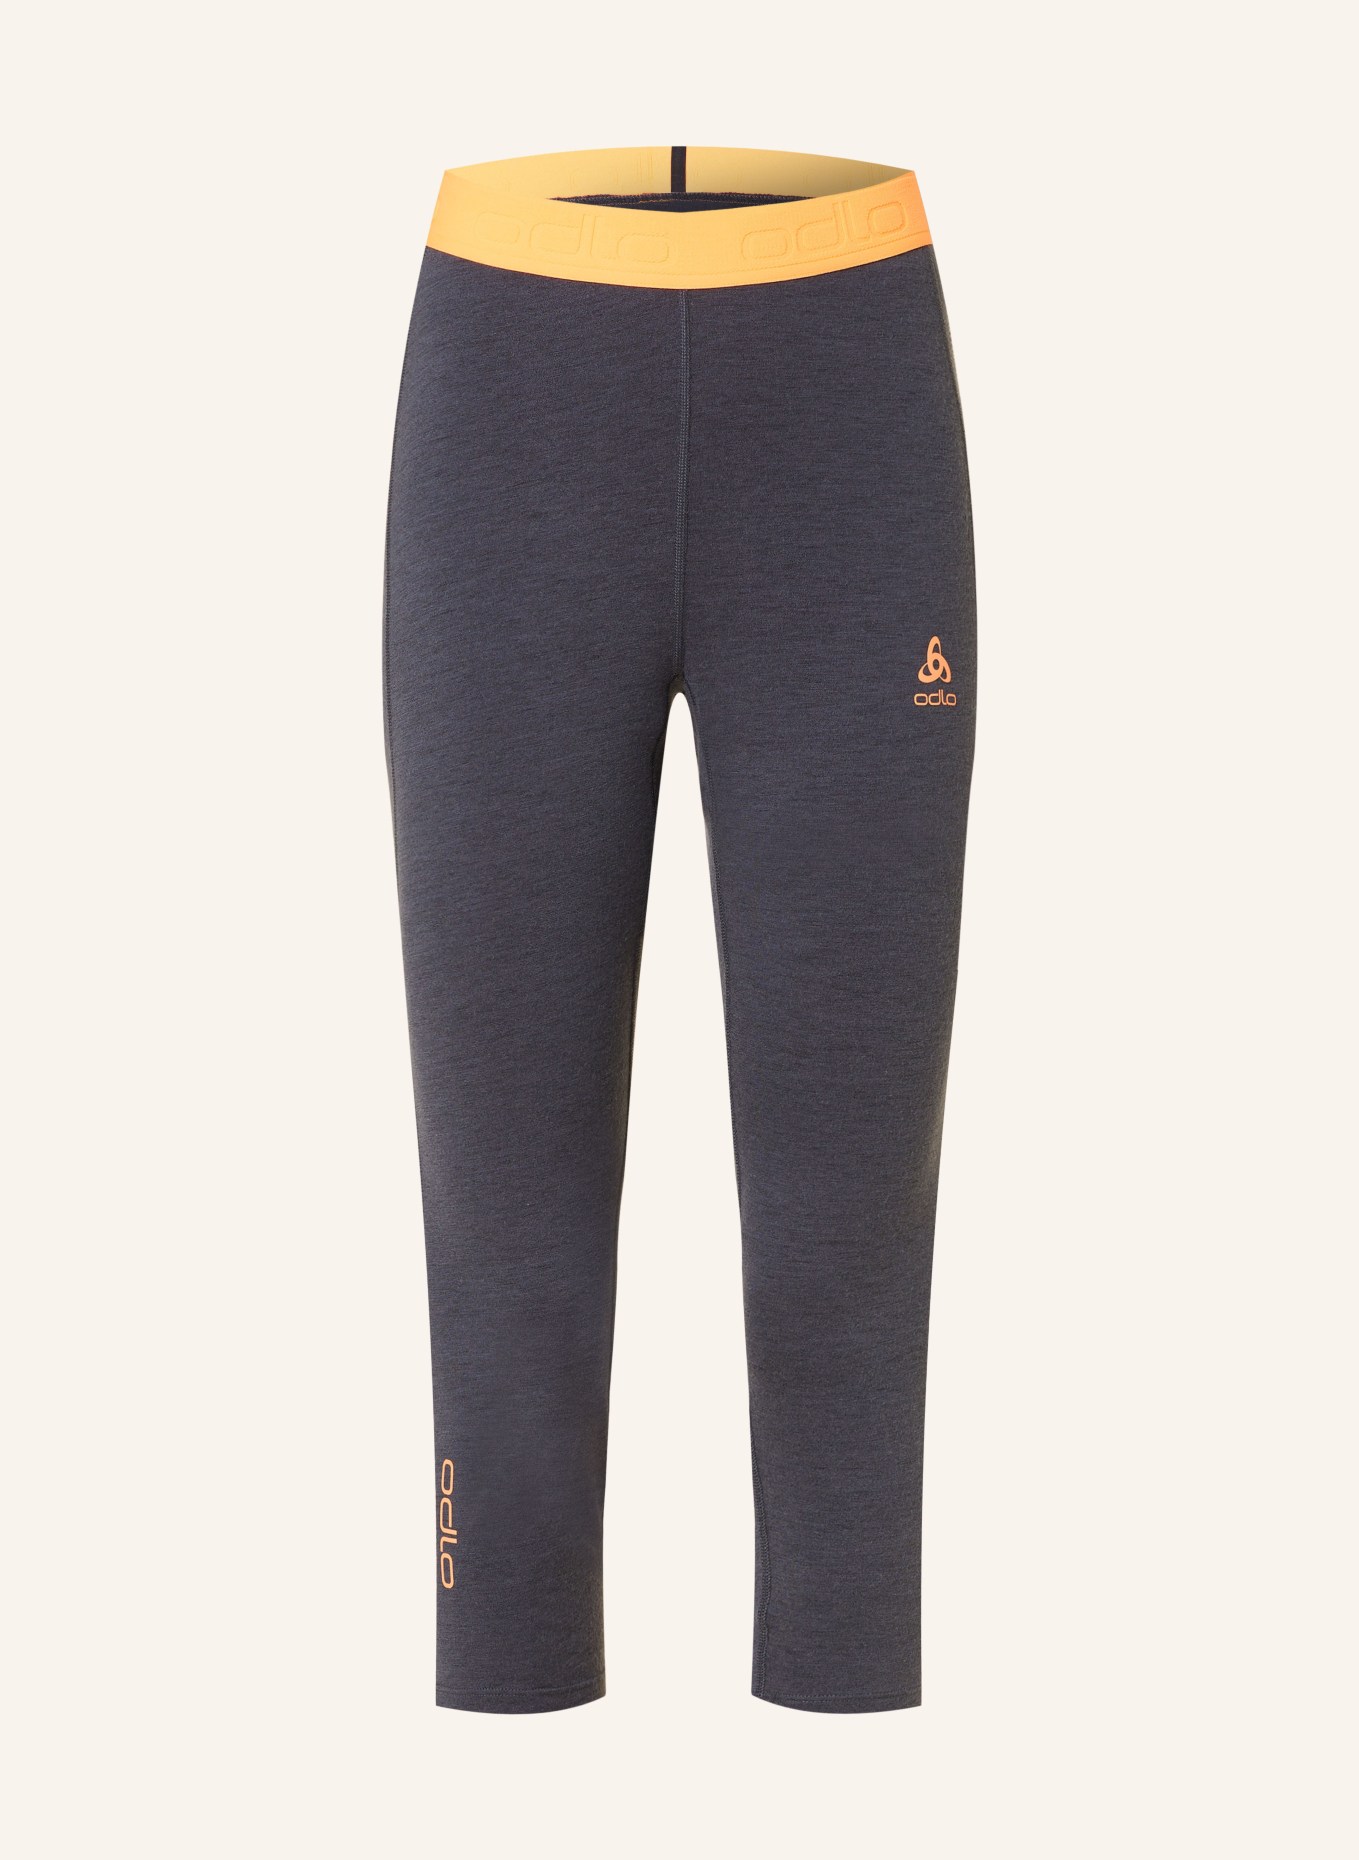 odlo Functional baselayer trousers REVELSTOKE PERFORMANCE with cropped leg length, Color: DARK GRAY (Image 1)